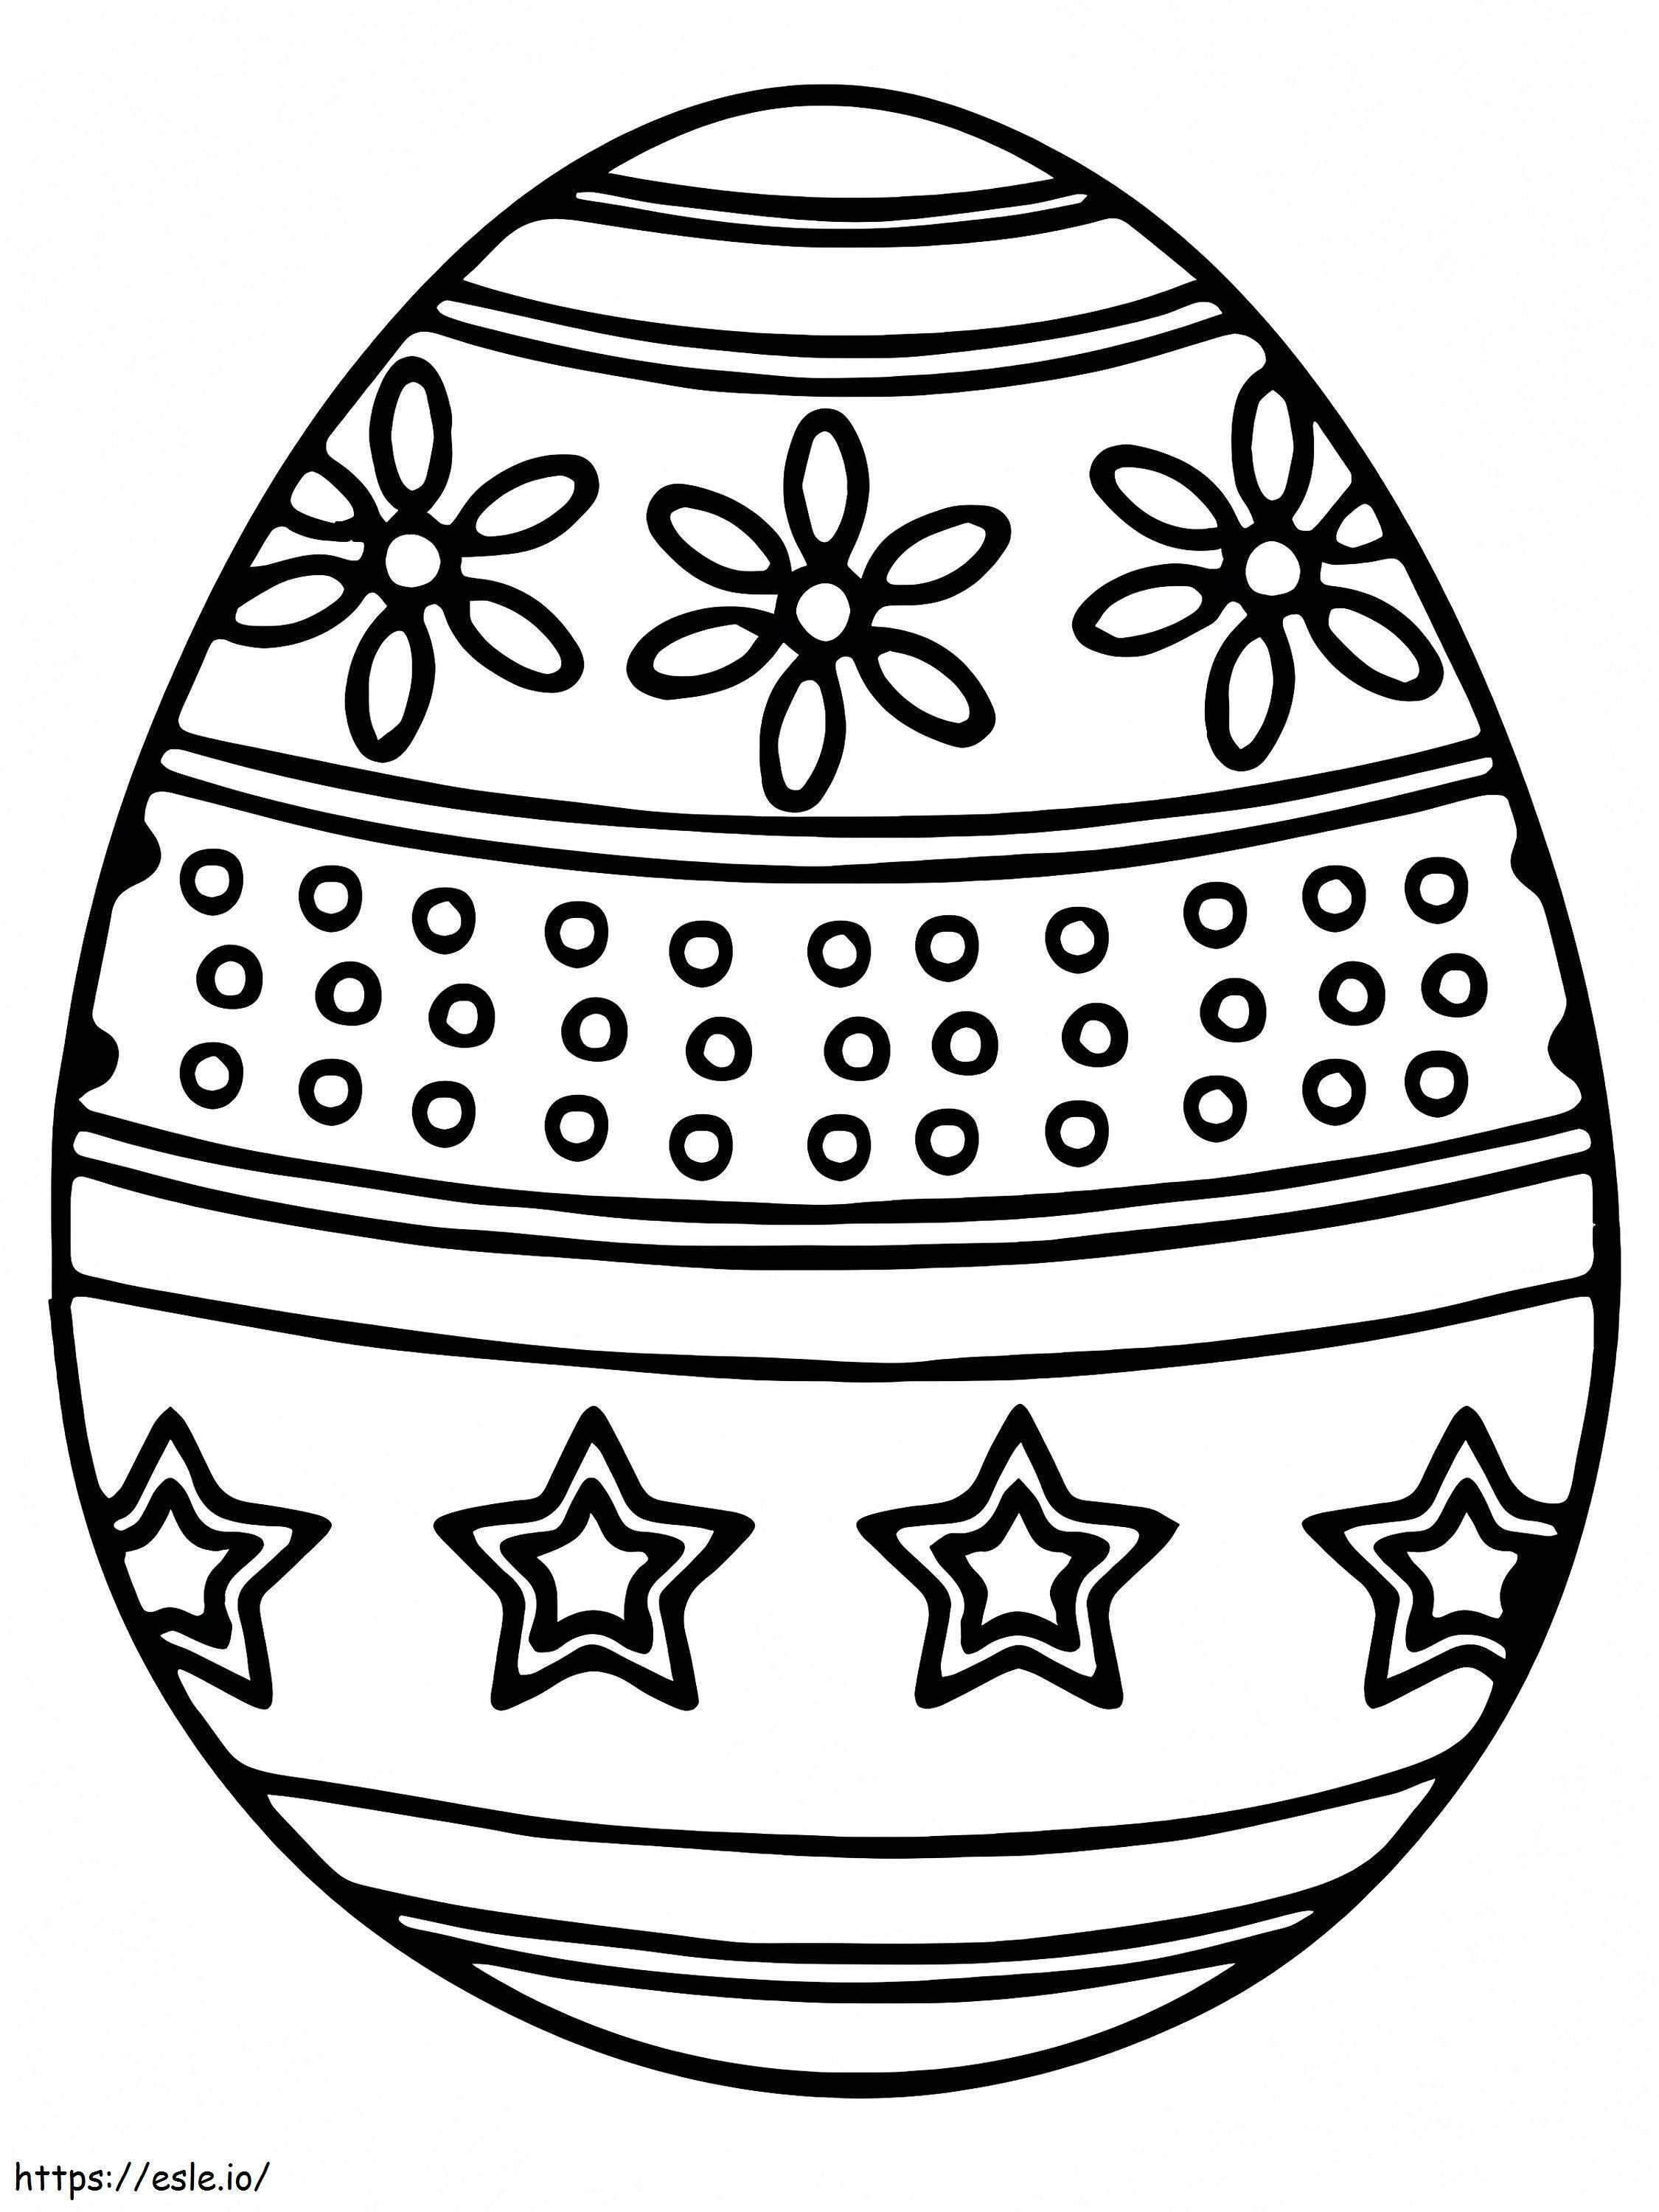 Exquisite Easter Egg coloring page